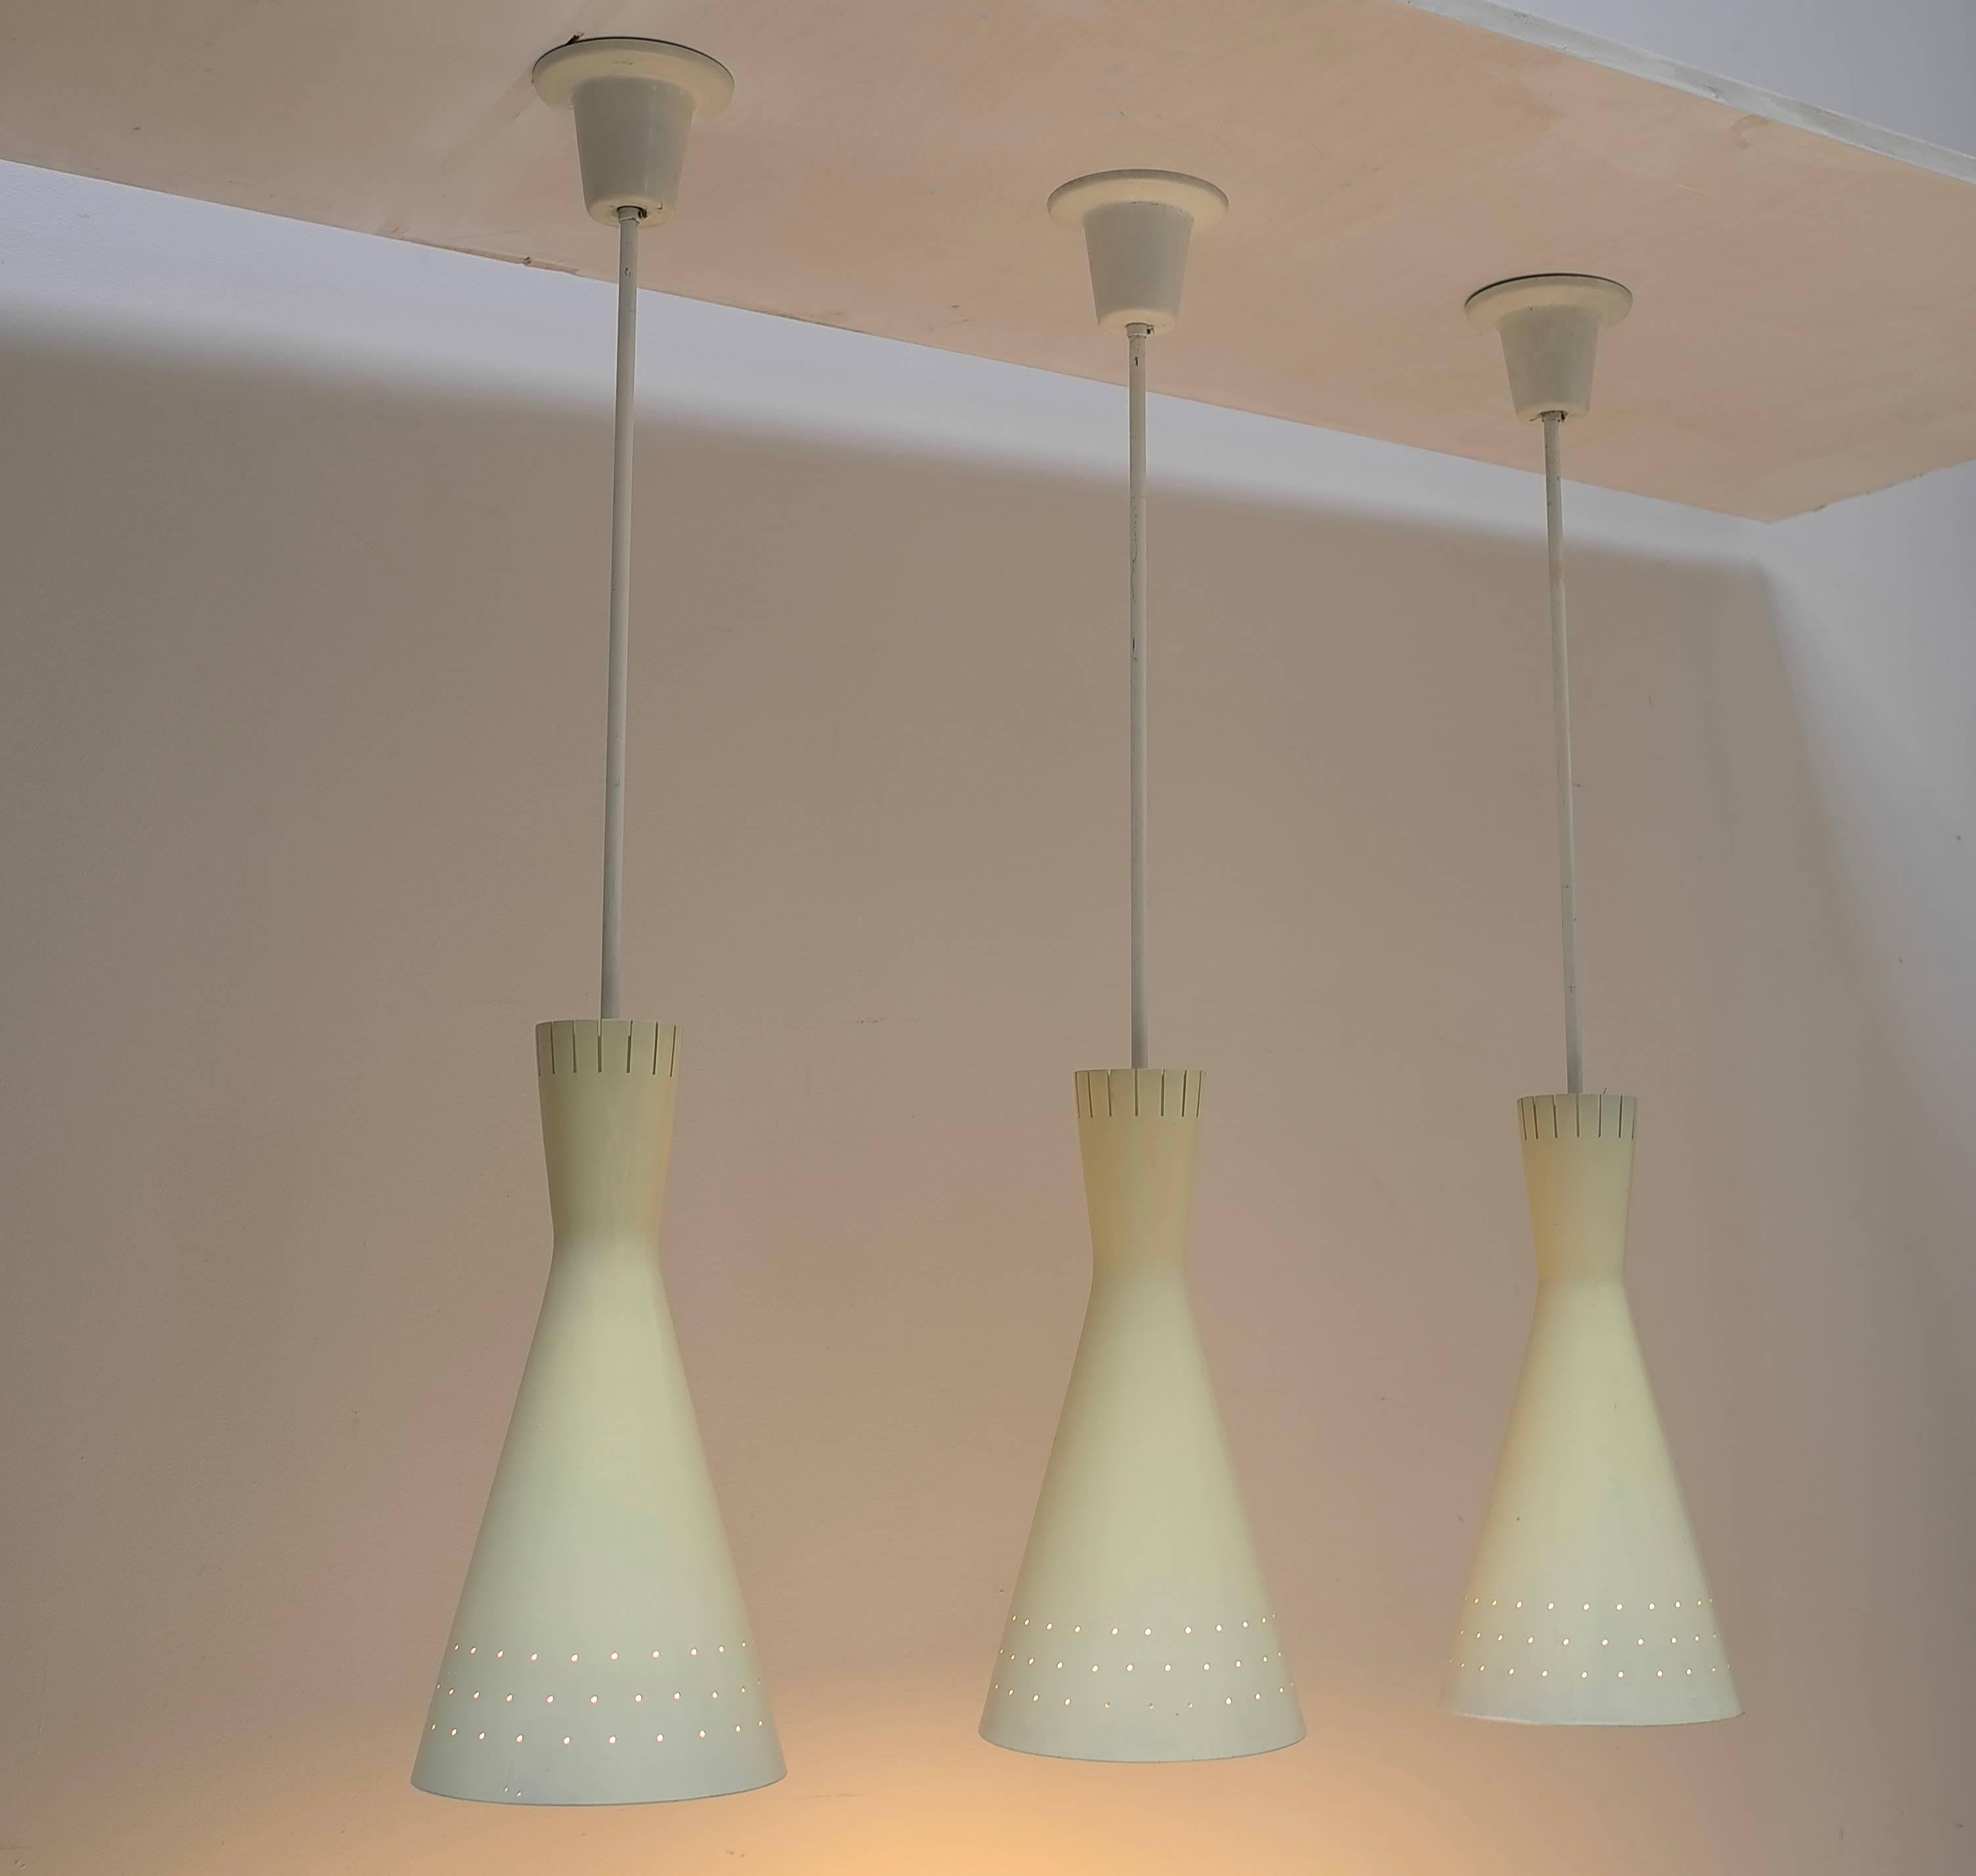 20 pieces large 1950s diabolo pendants in light yellow.
Most probably manufactured by Stilnovo or Stilux, Italy.